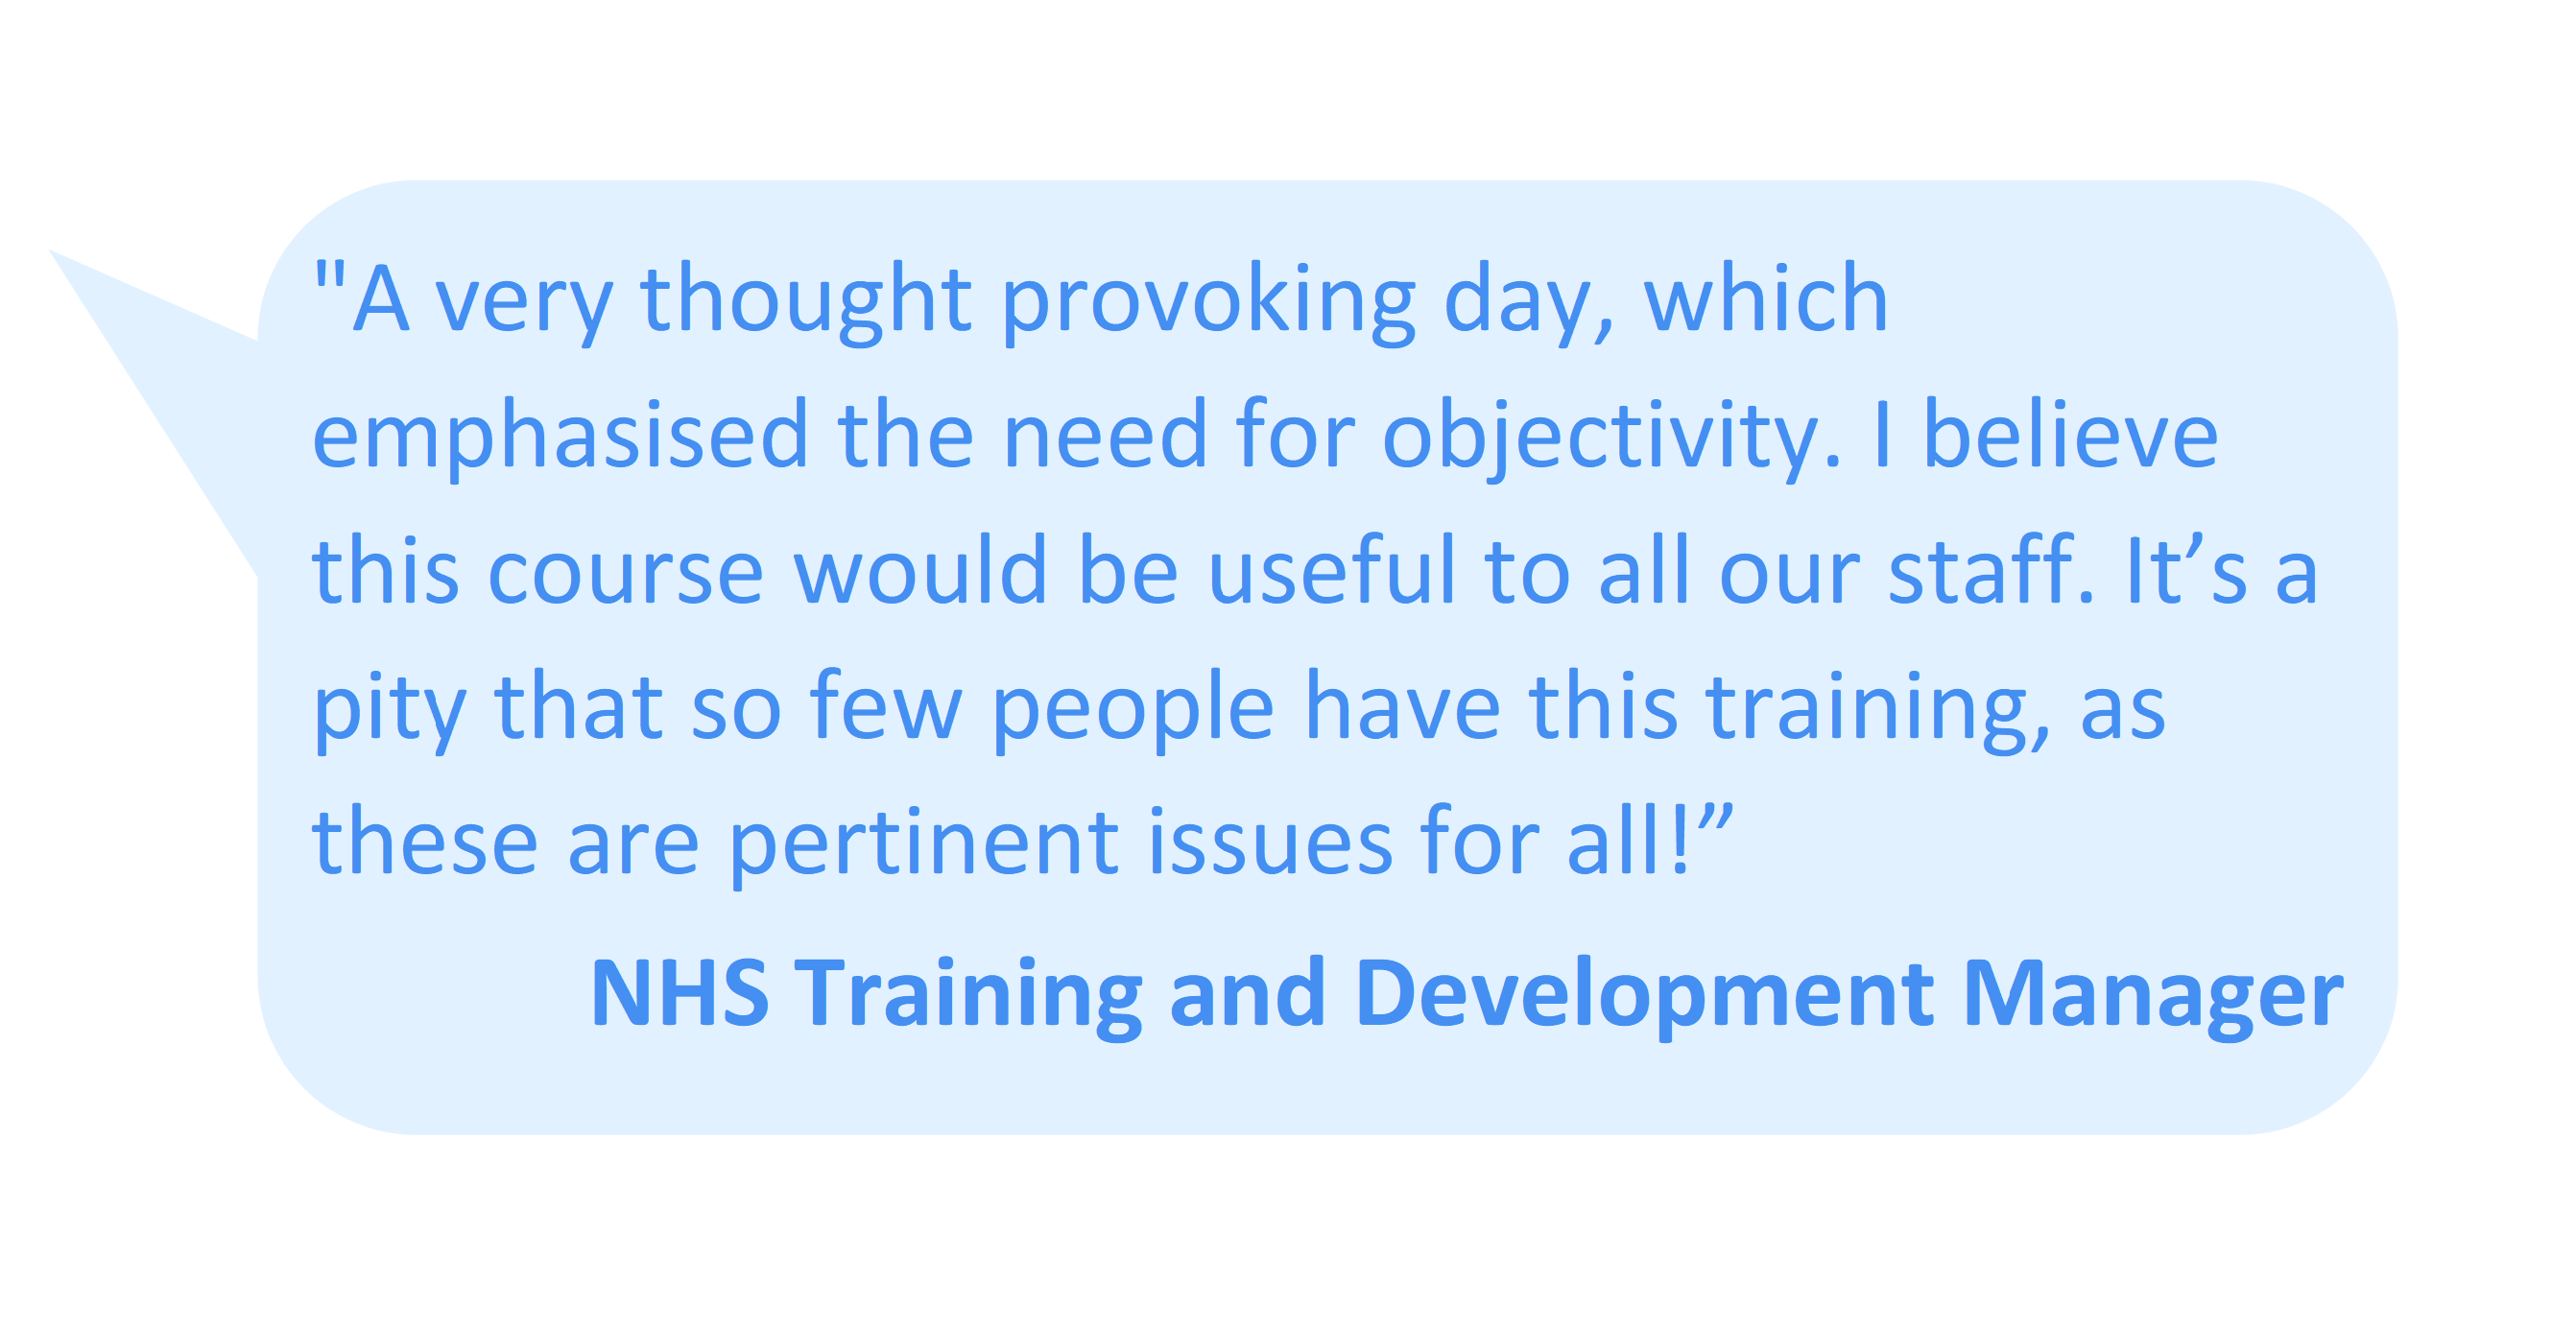 “A very thought provoking day, which emphasised the need for objectivity. I believe this course would be useful to all our staff. It’s a pity that so few people have this training, as these are pertinent issues for all!” NHS Training and Development Manager